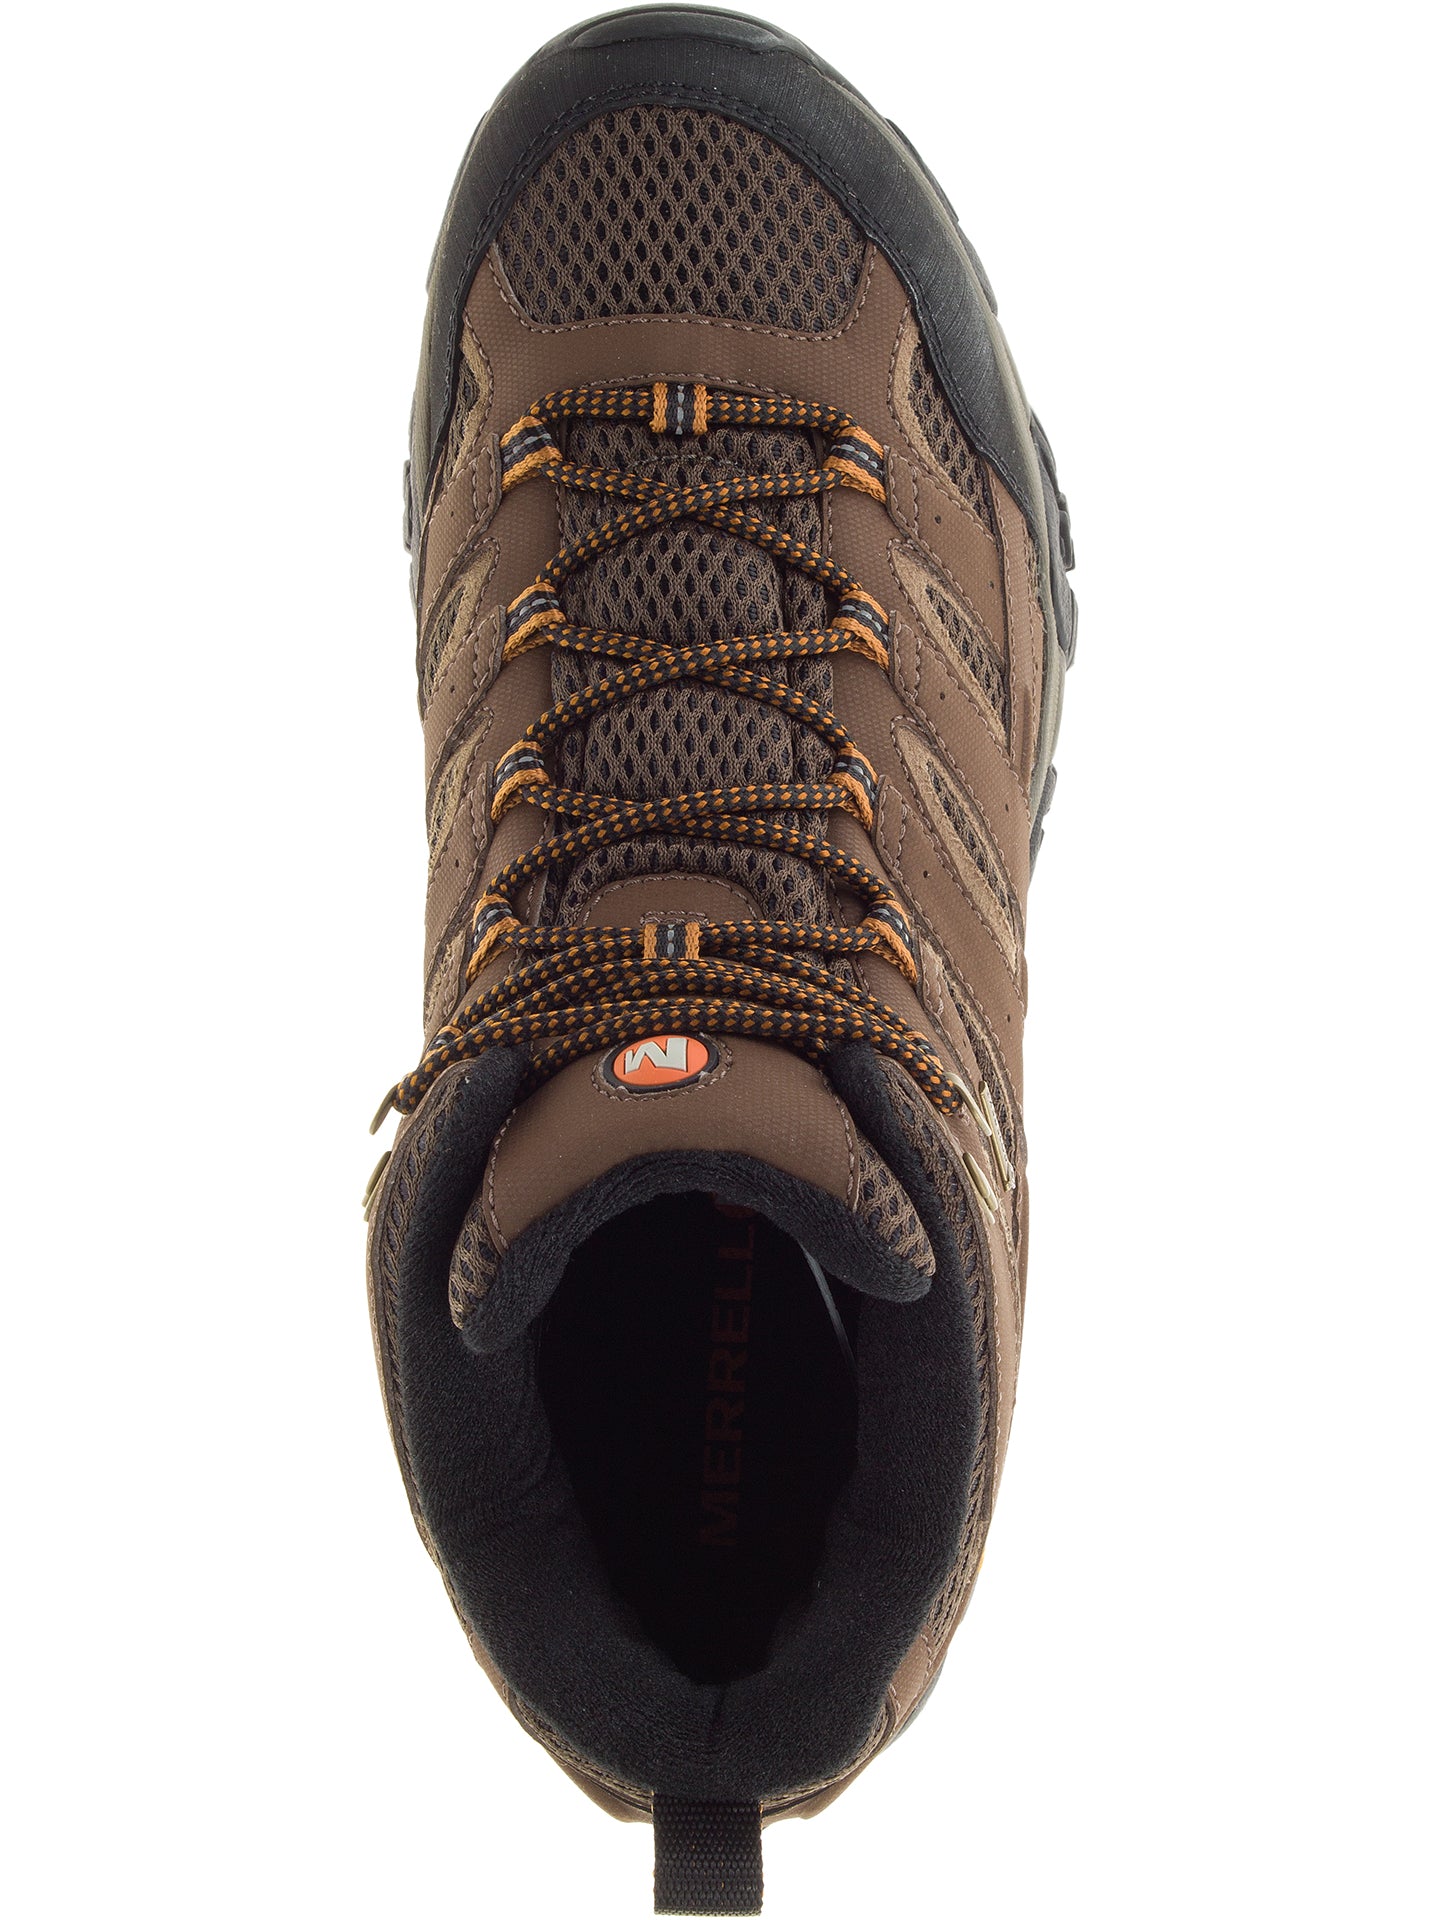 Moab 2 Mid Gore Tex Hiking Boots